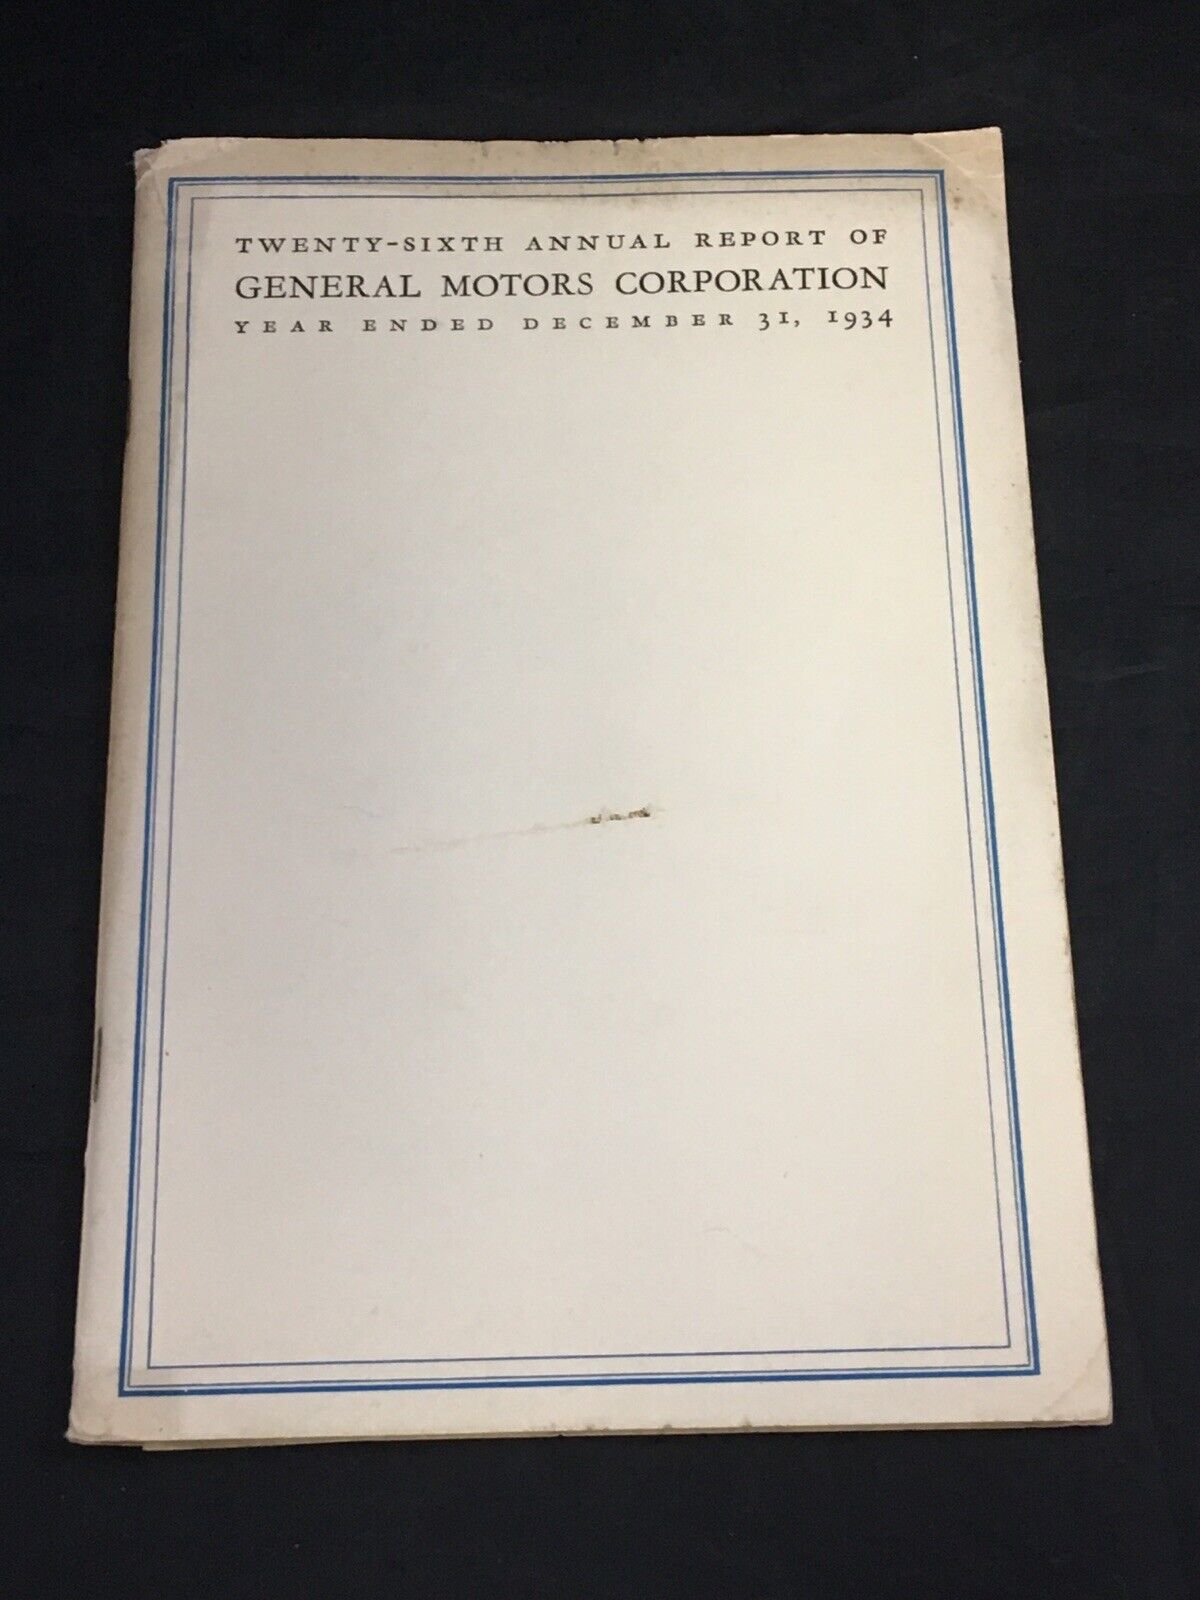 GENERAL MOTORS 26th Annual Report 1934 with Poster Showing Holdings